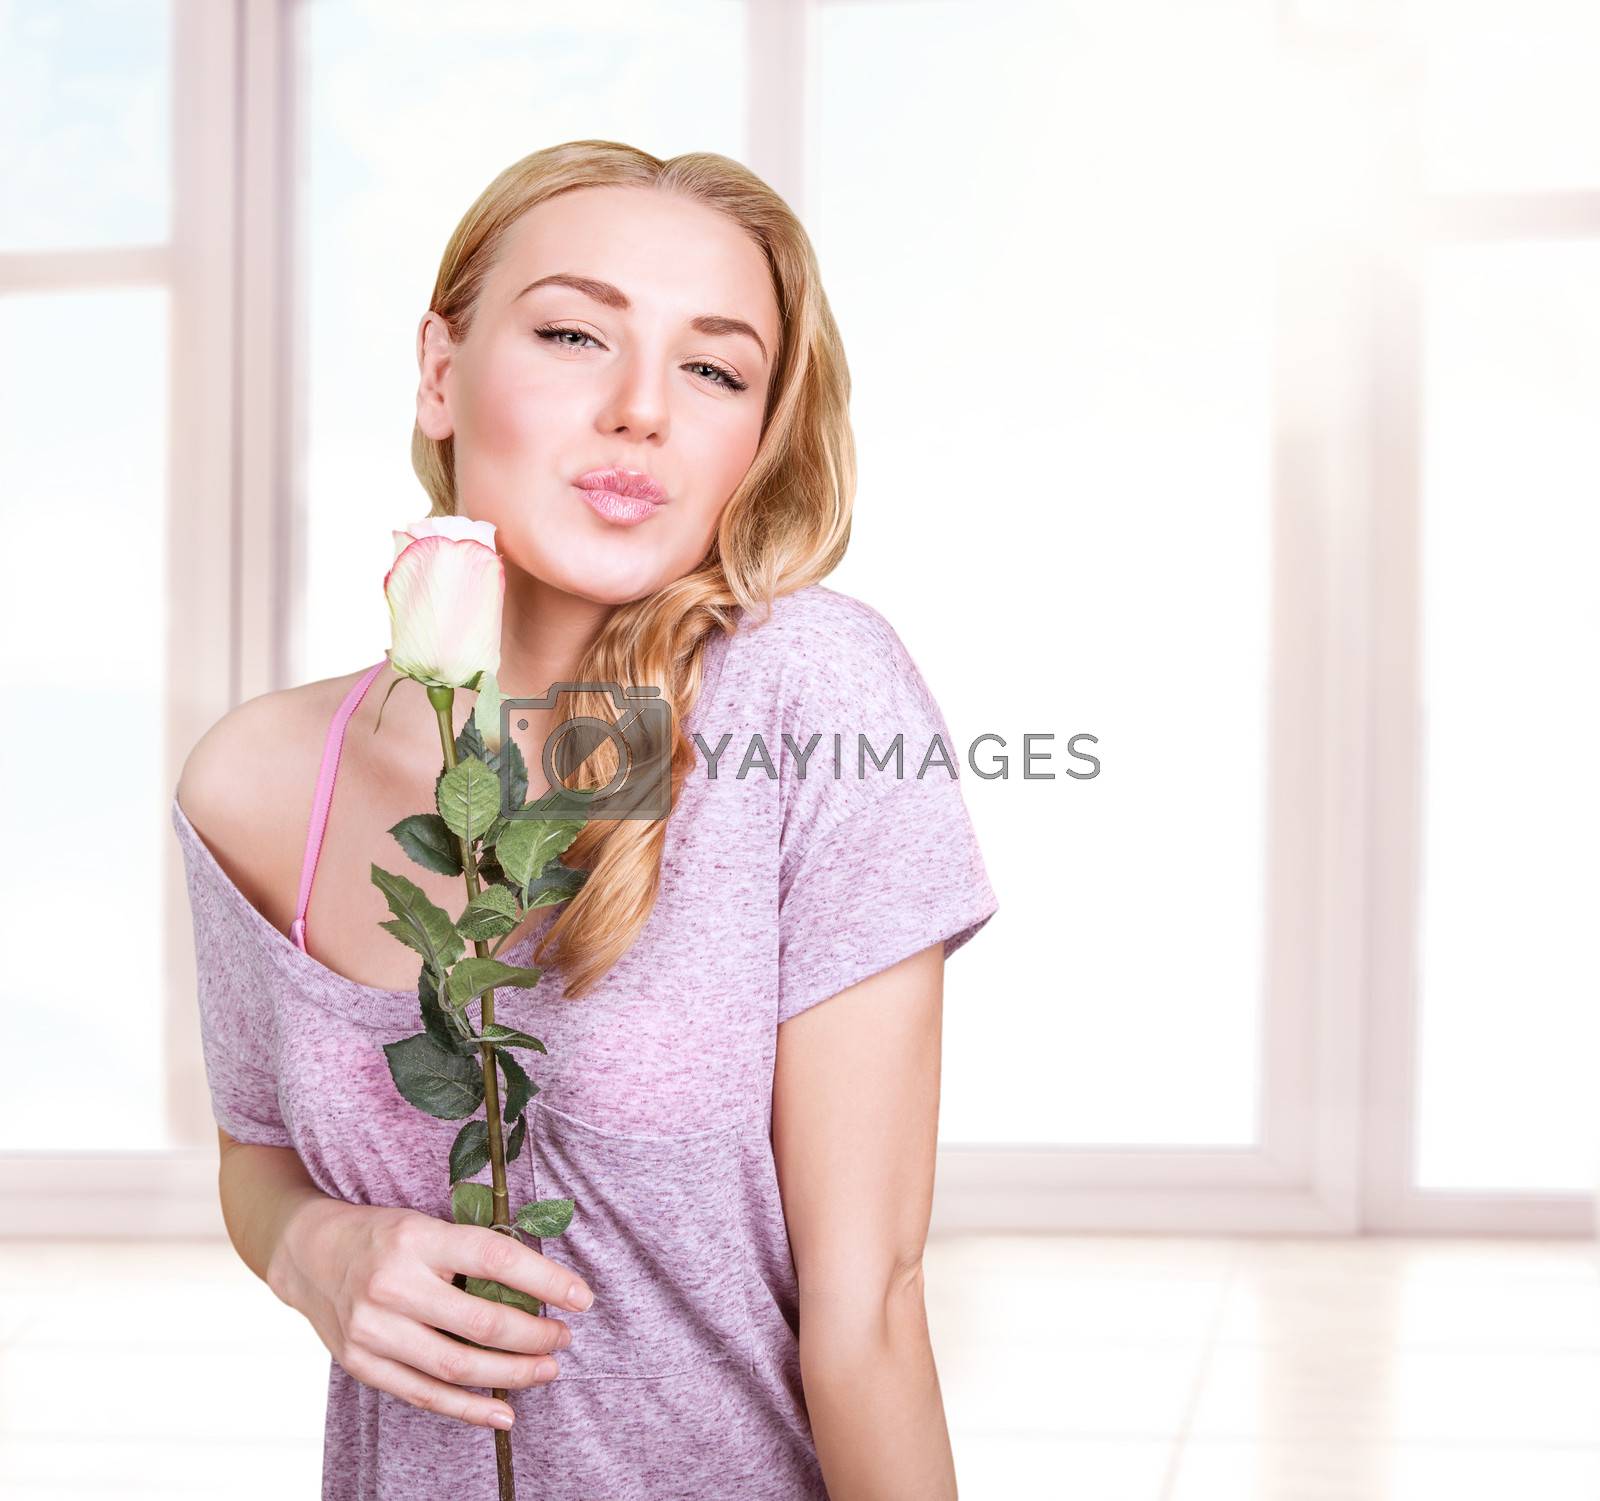 Royalty free image of Romantic girl by Anna_Omelchenko